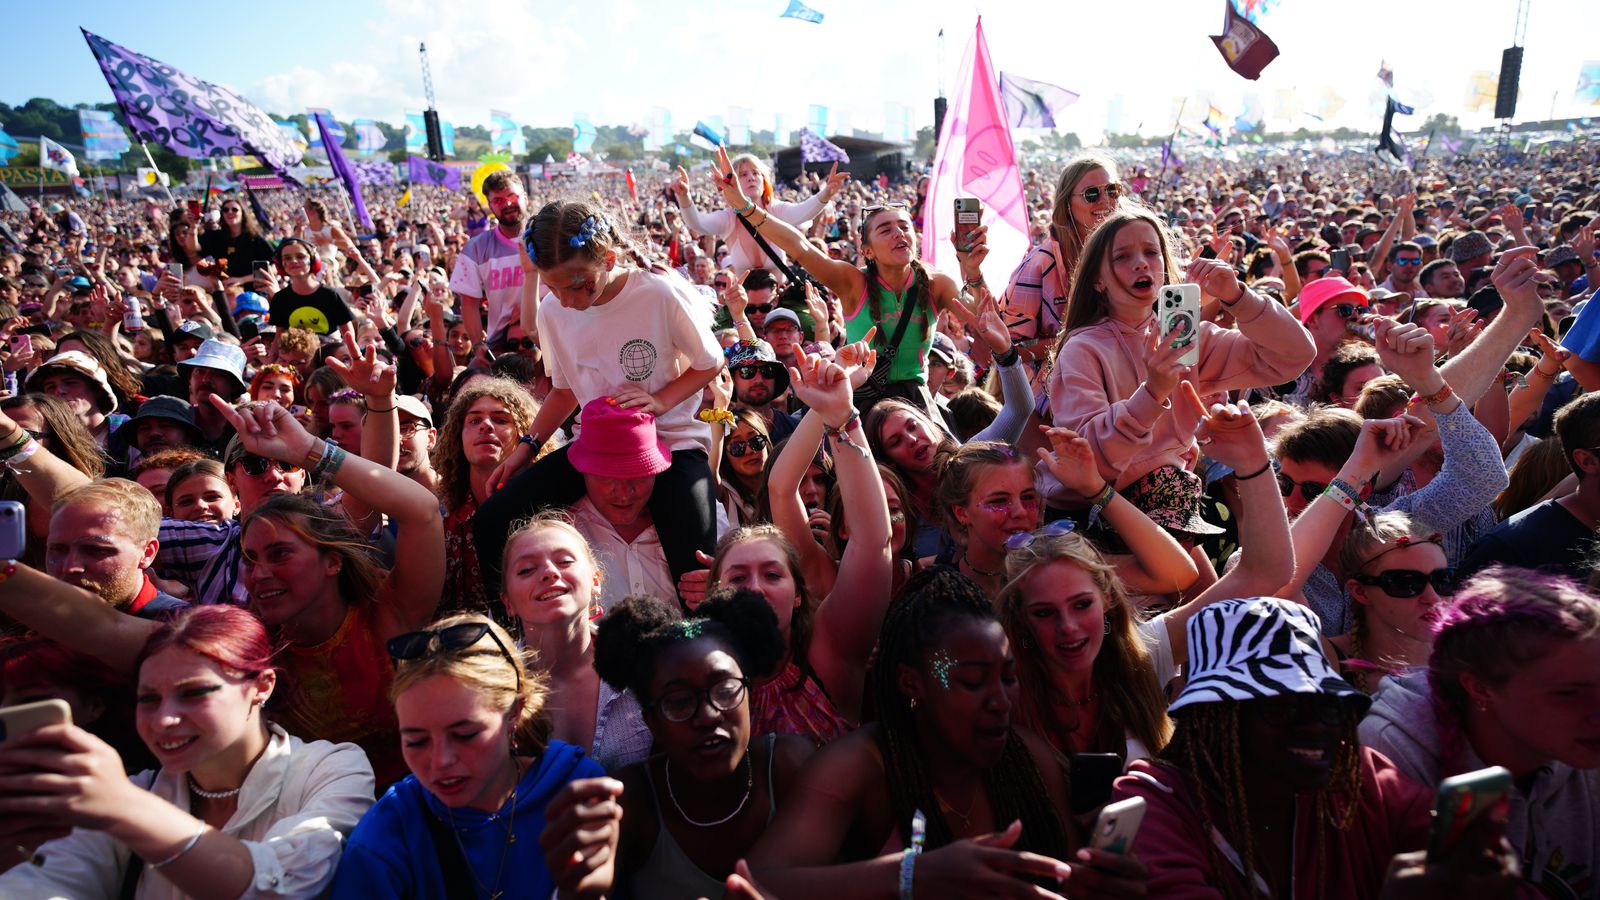 Glastonbury hikes ticket prices to £340 amid 'incredibly challenging times'